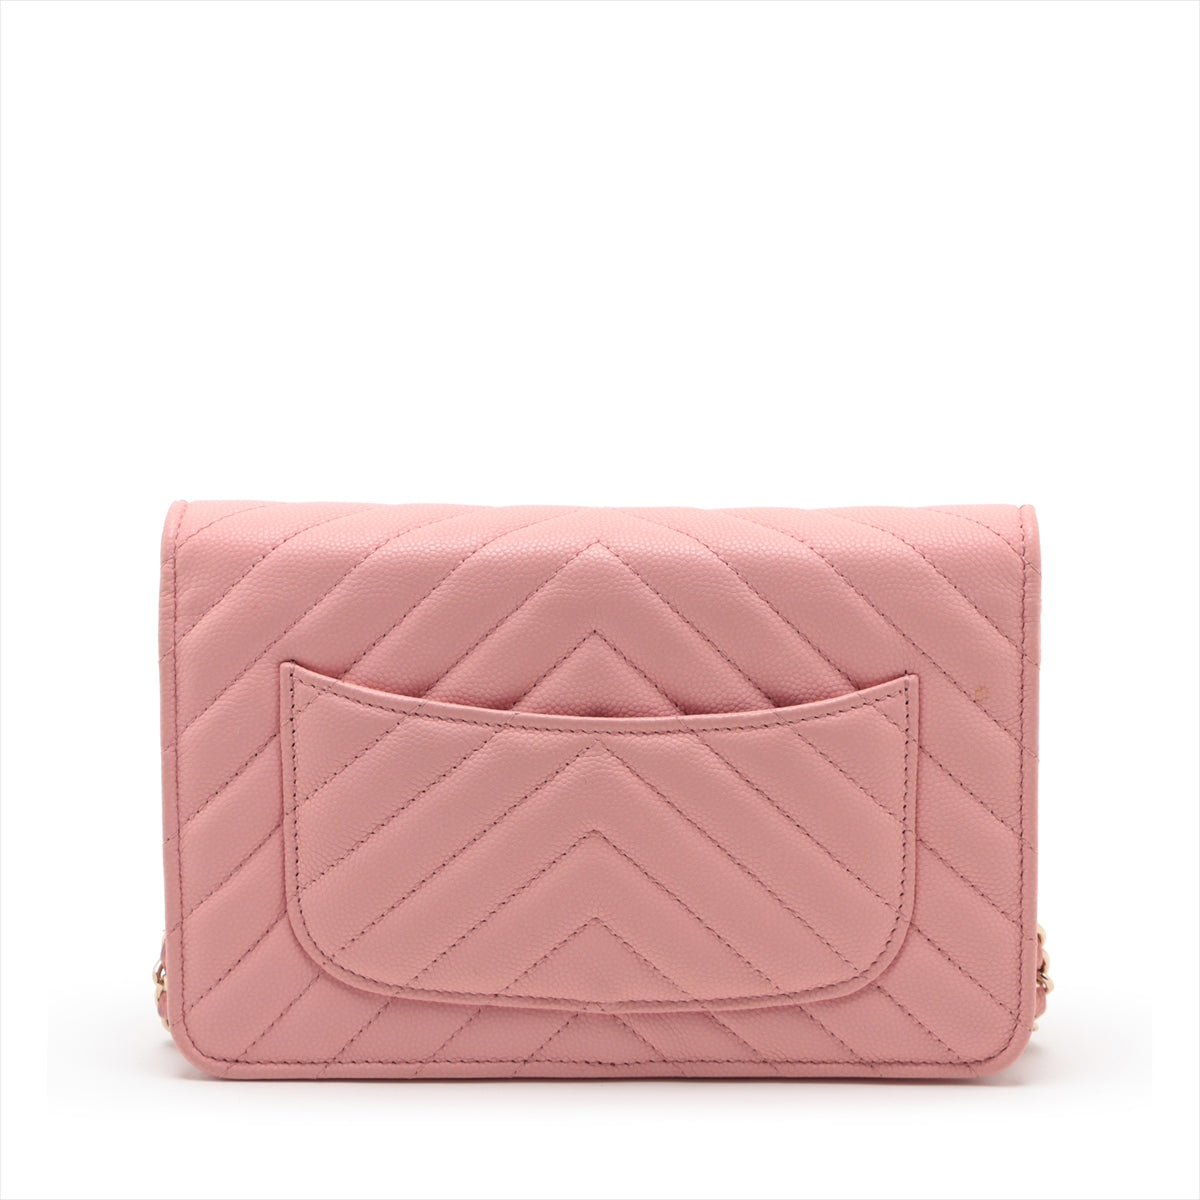 Chanel V Stitch Caviar S Chain Wallet Pink Gold